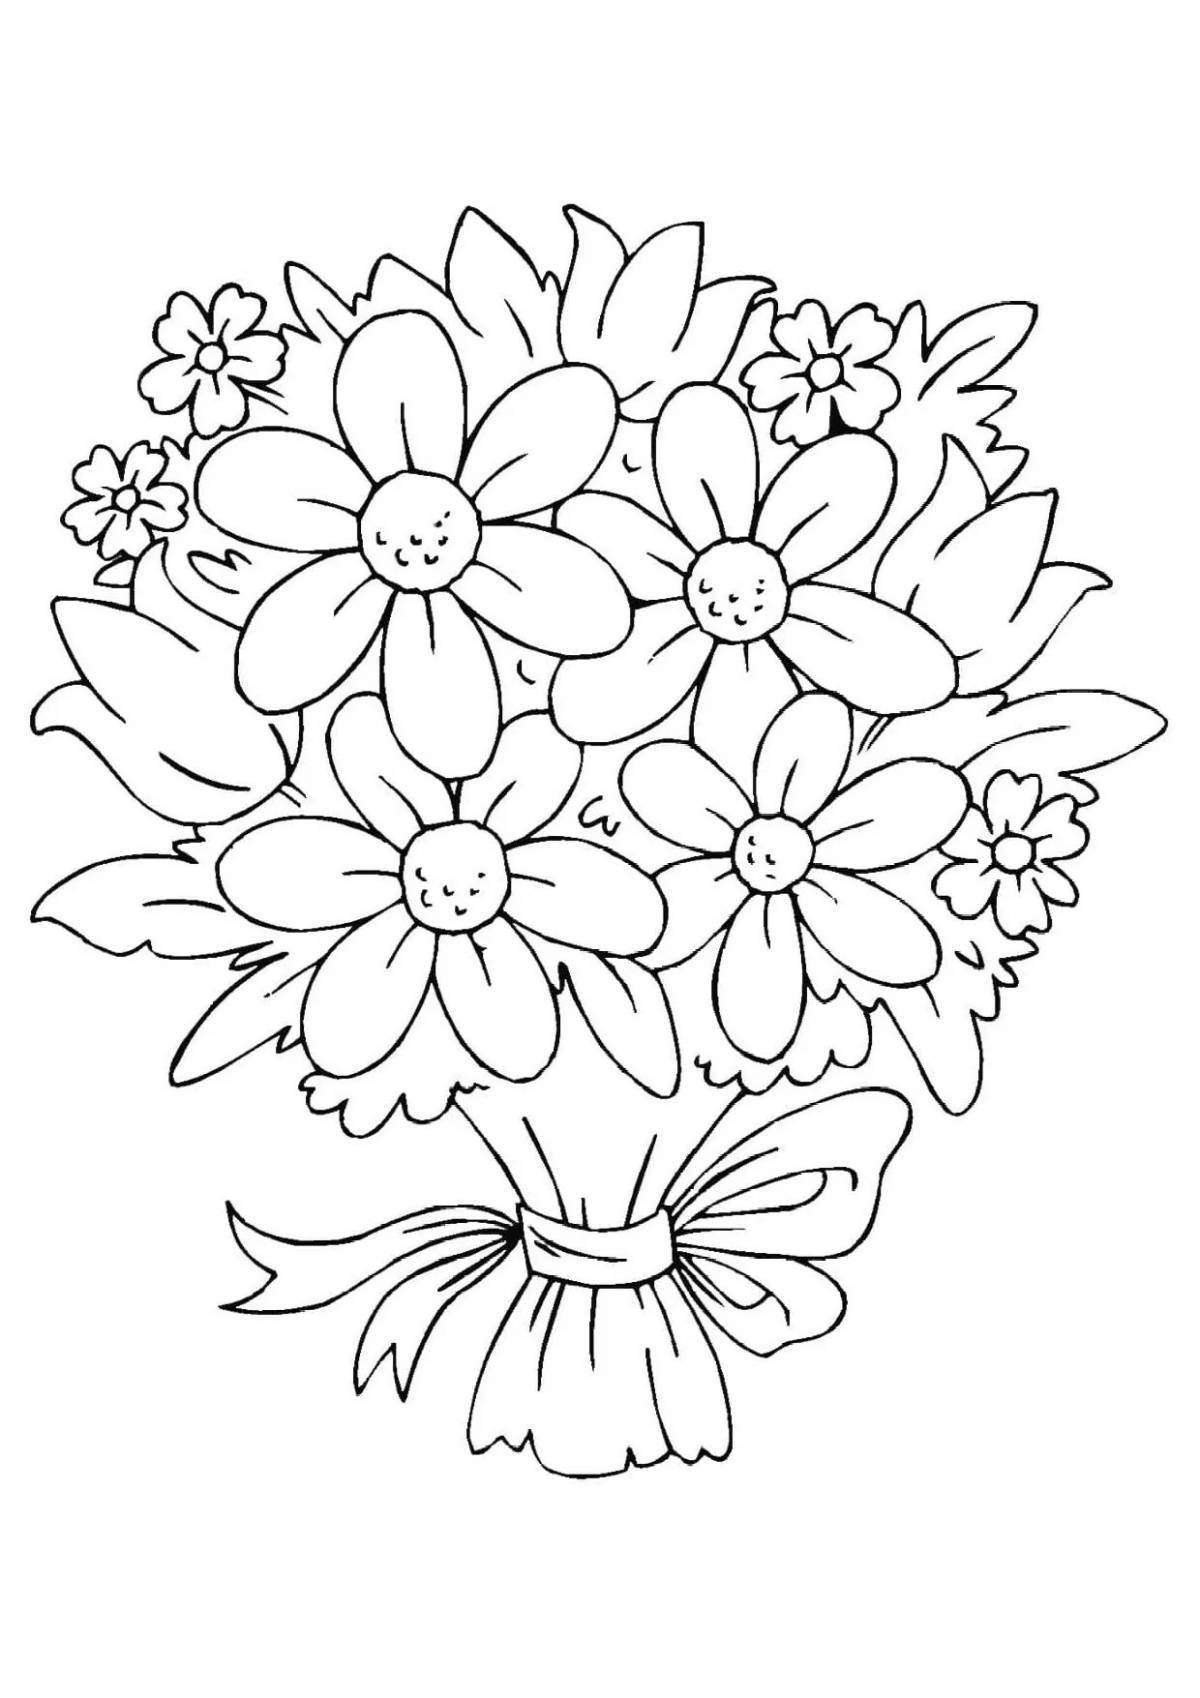 Coloring poised flower bouquets